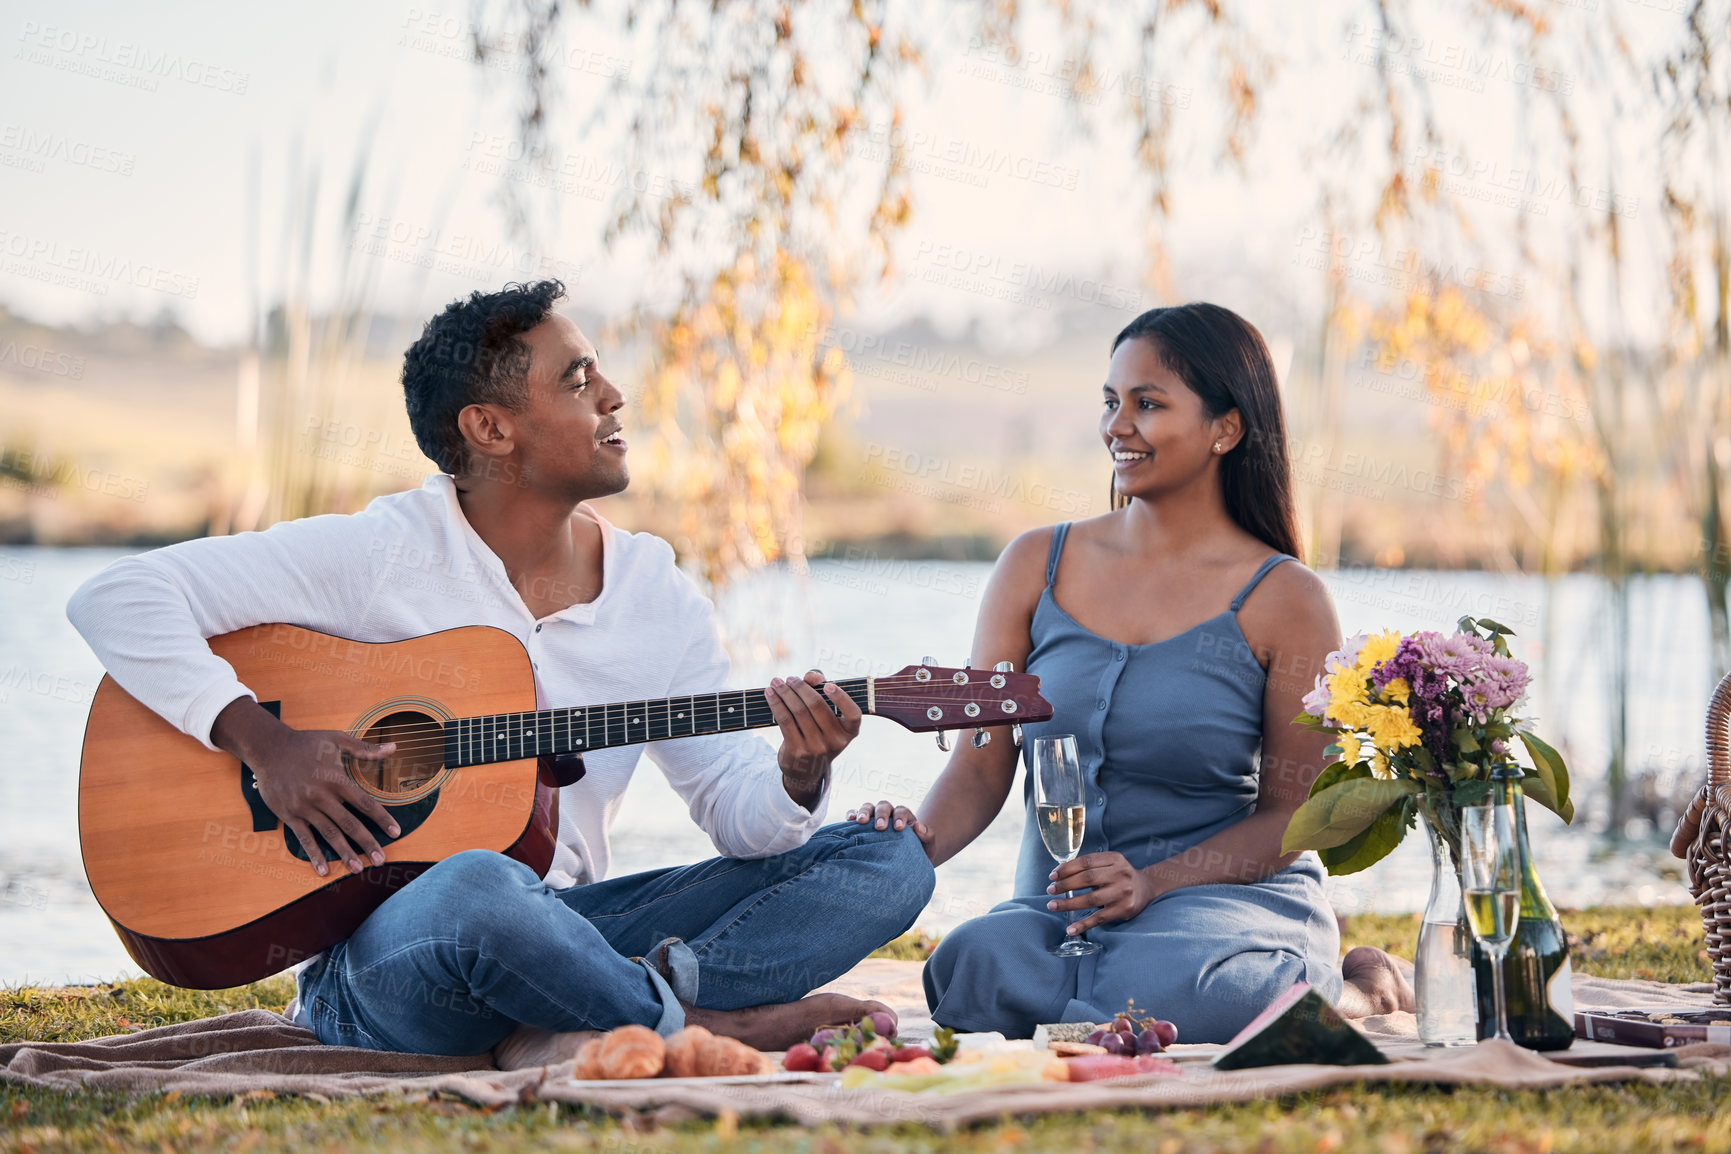 Buy stock photo Shot of a young man playing a guitar while on a picnic with his girlfriend at a lakeside